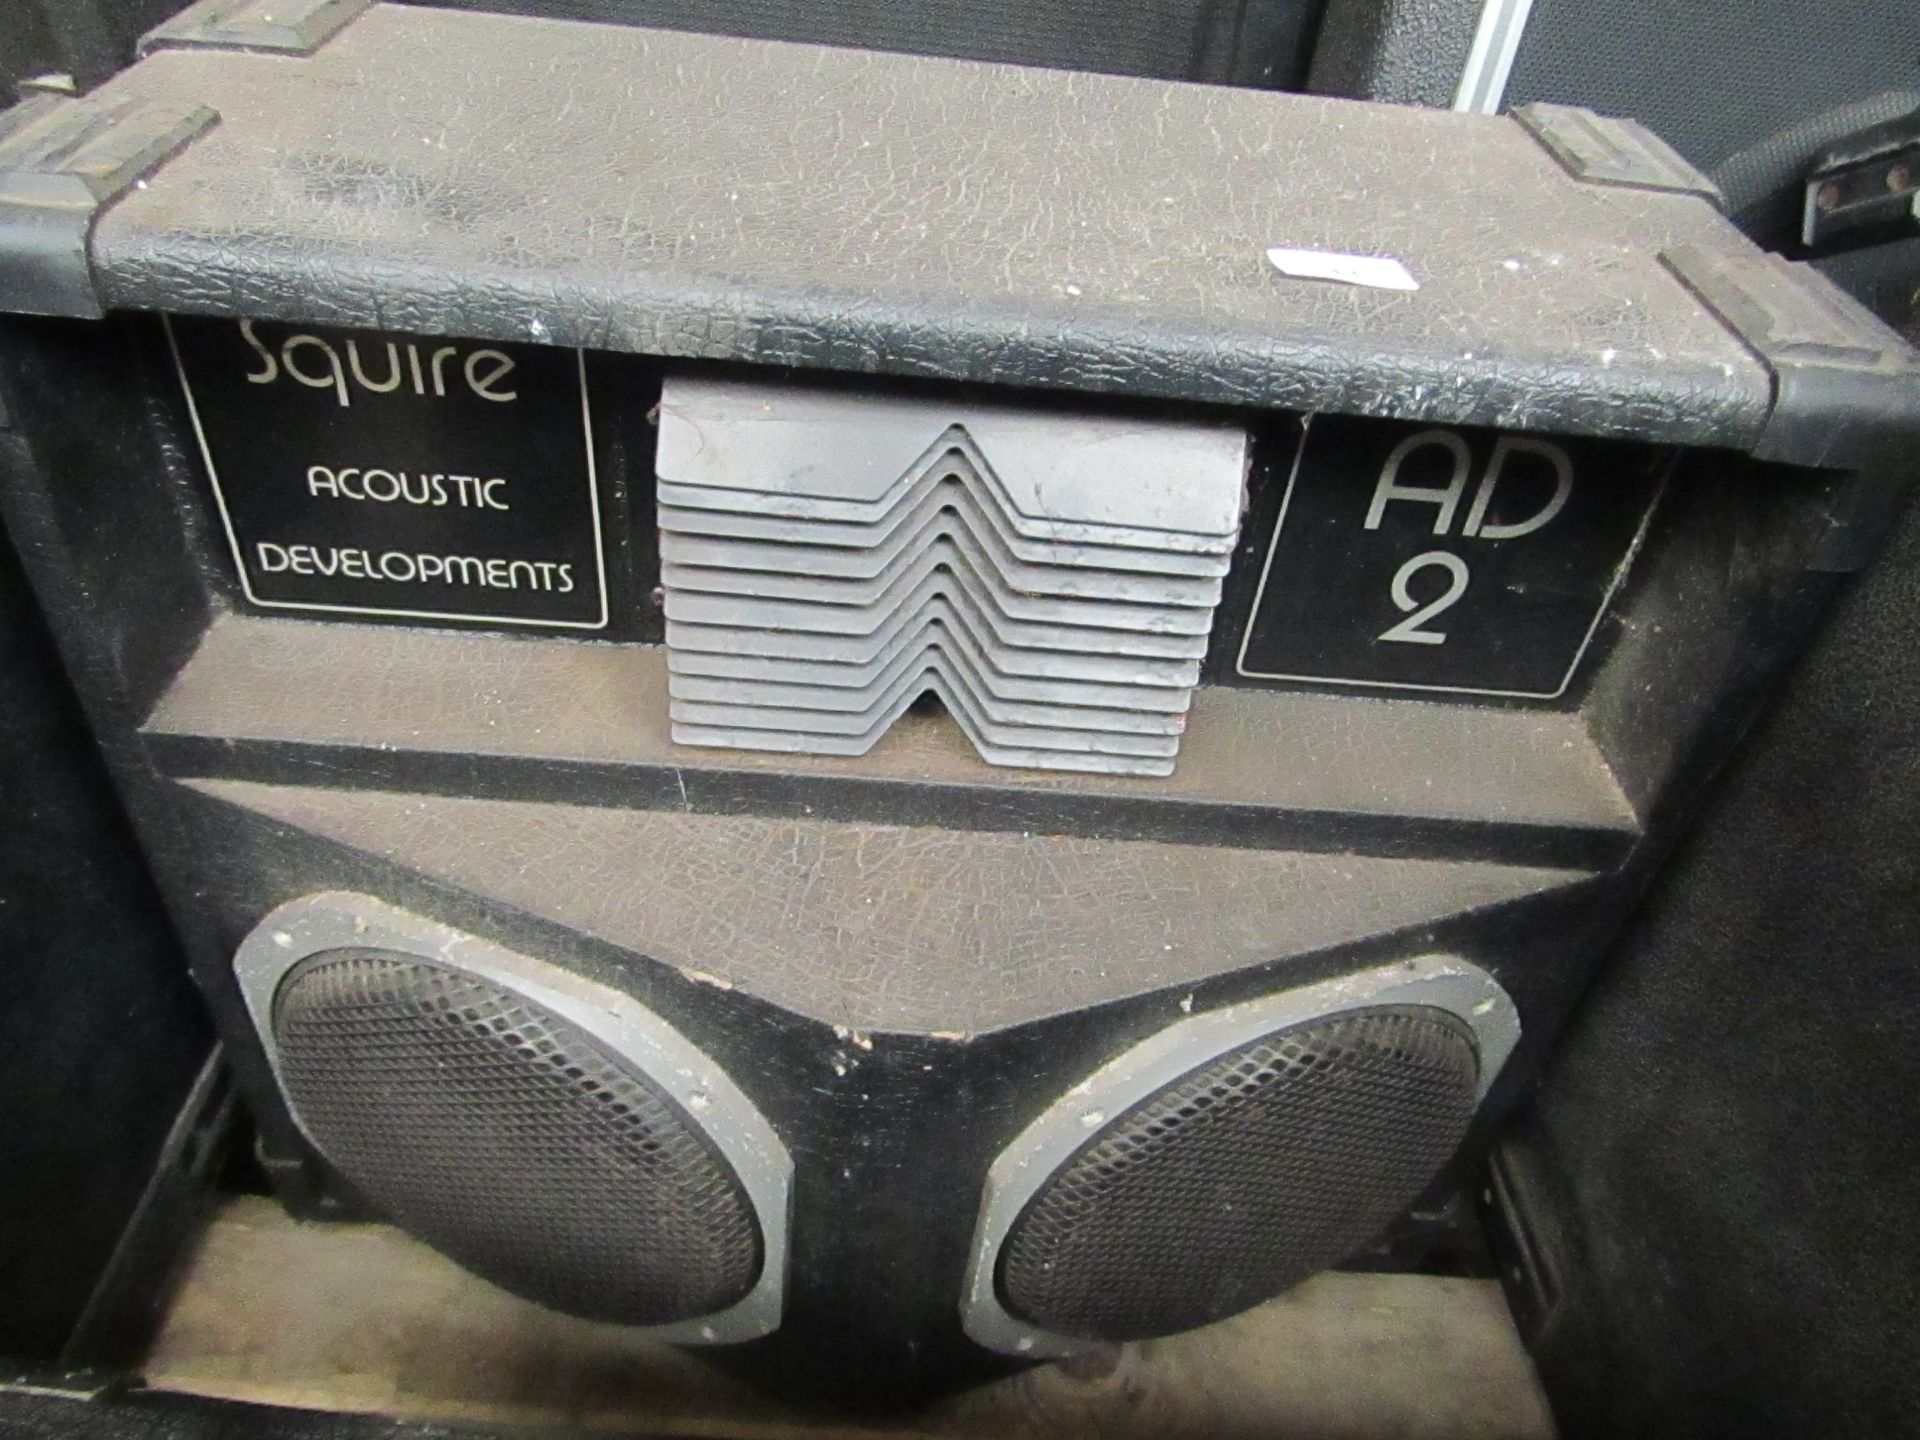 Squire Acoustic developments HD 2 Speaker, unchecked. please read lot 0 before bidding!!!!